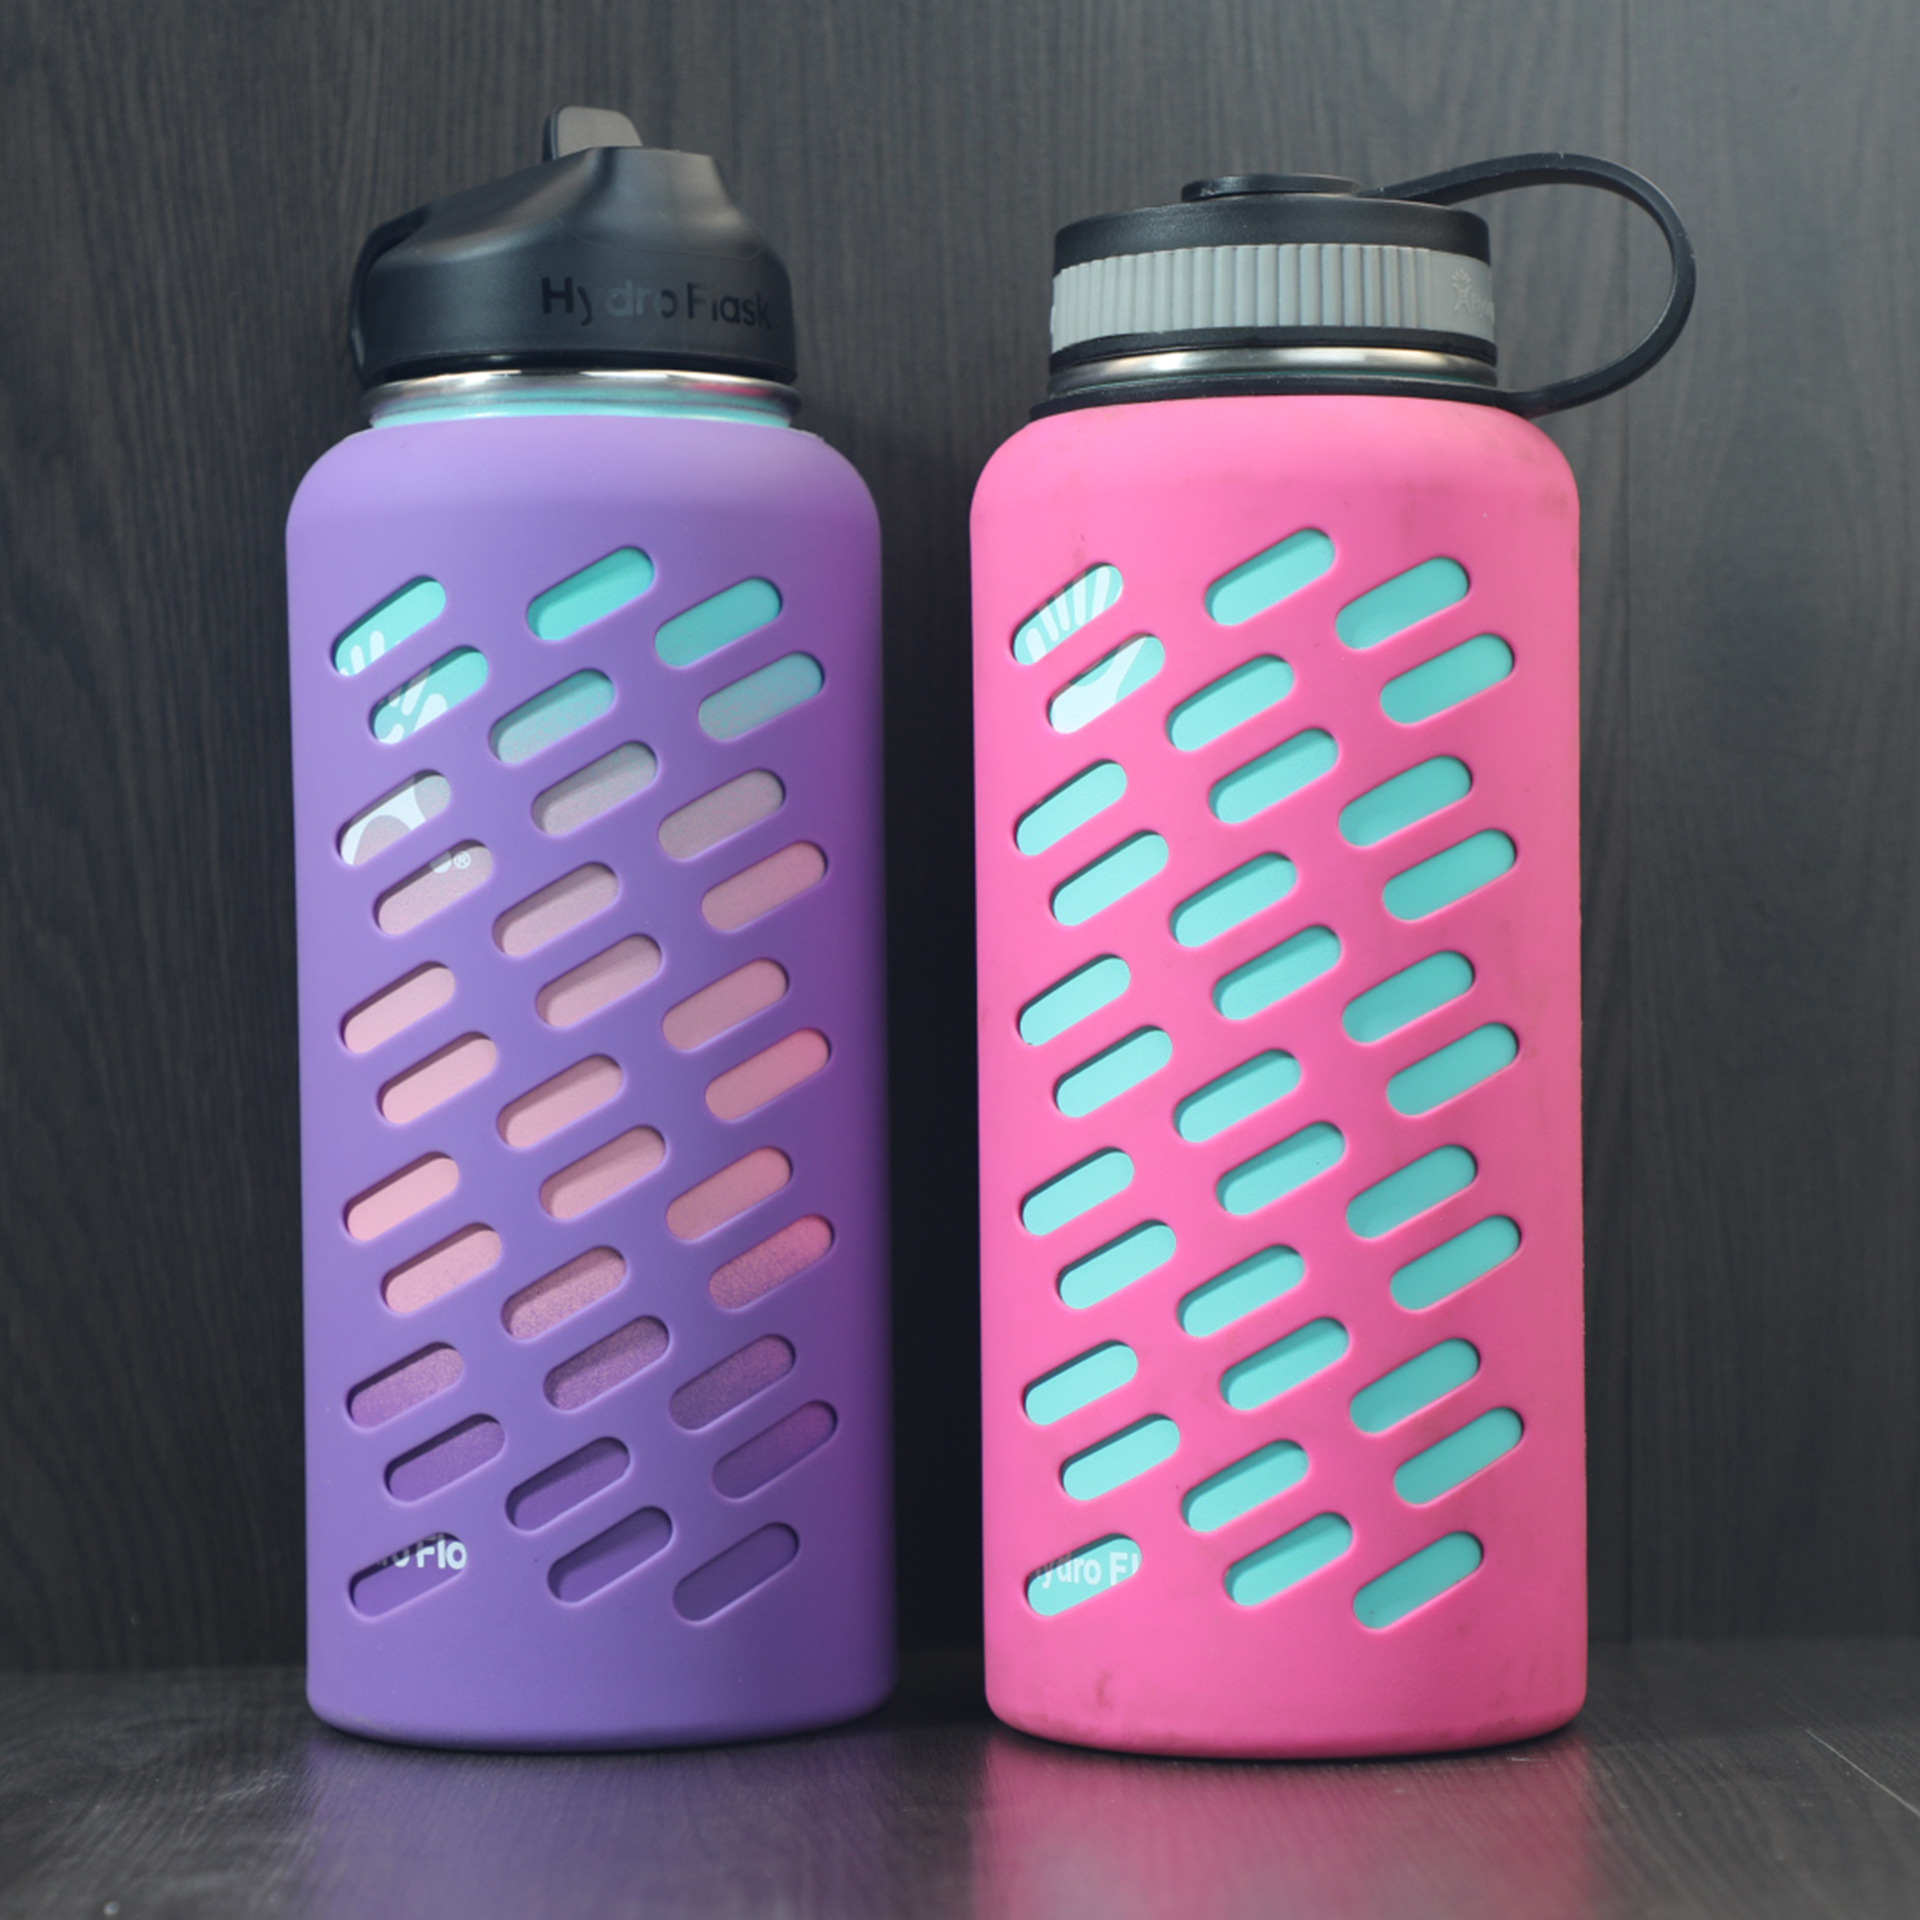 Hydro Flask 18-32-40oz Space Bottle Silicone Sleeve: Hollow Texture for Heat Dissipation, Insulation, and Cup Protection